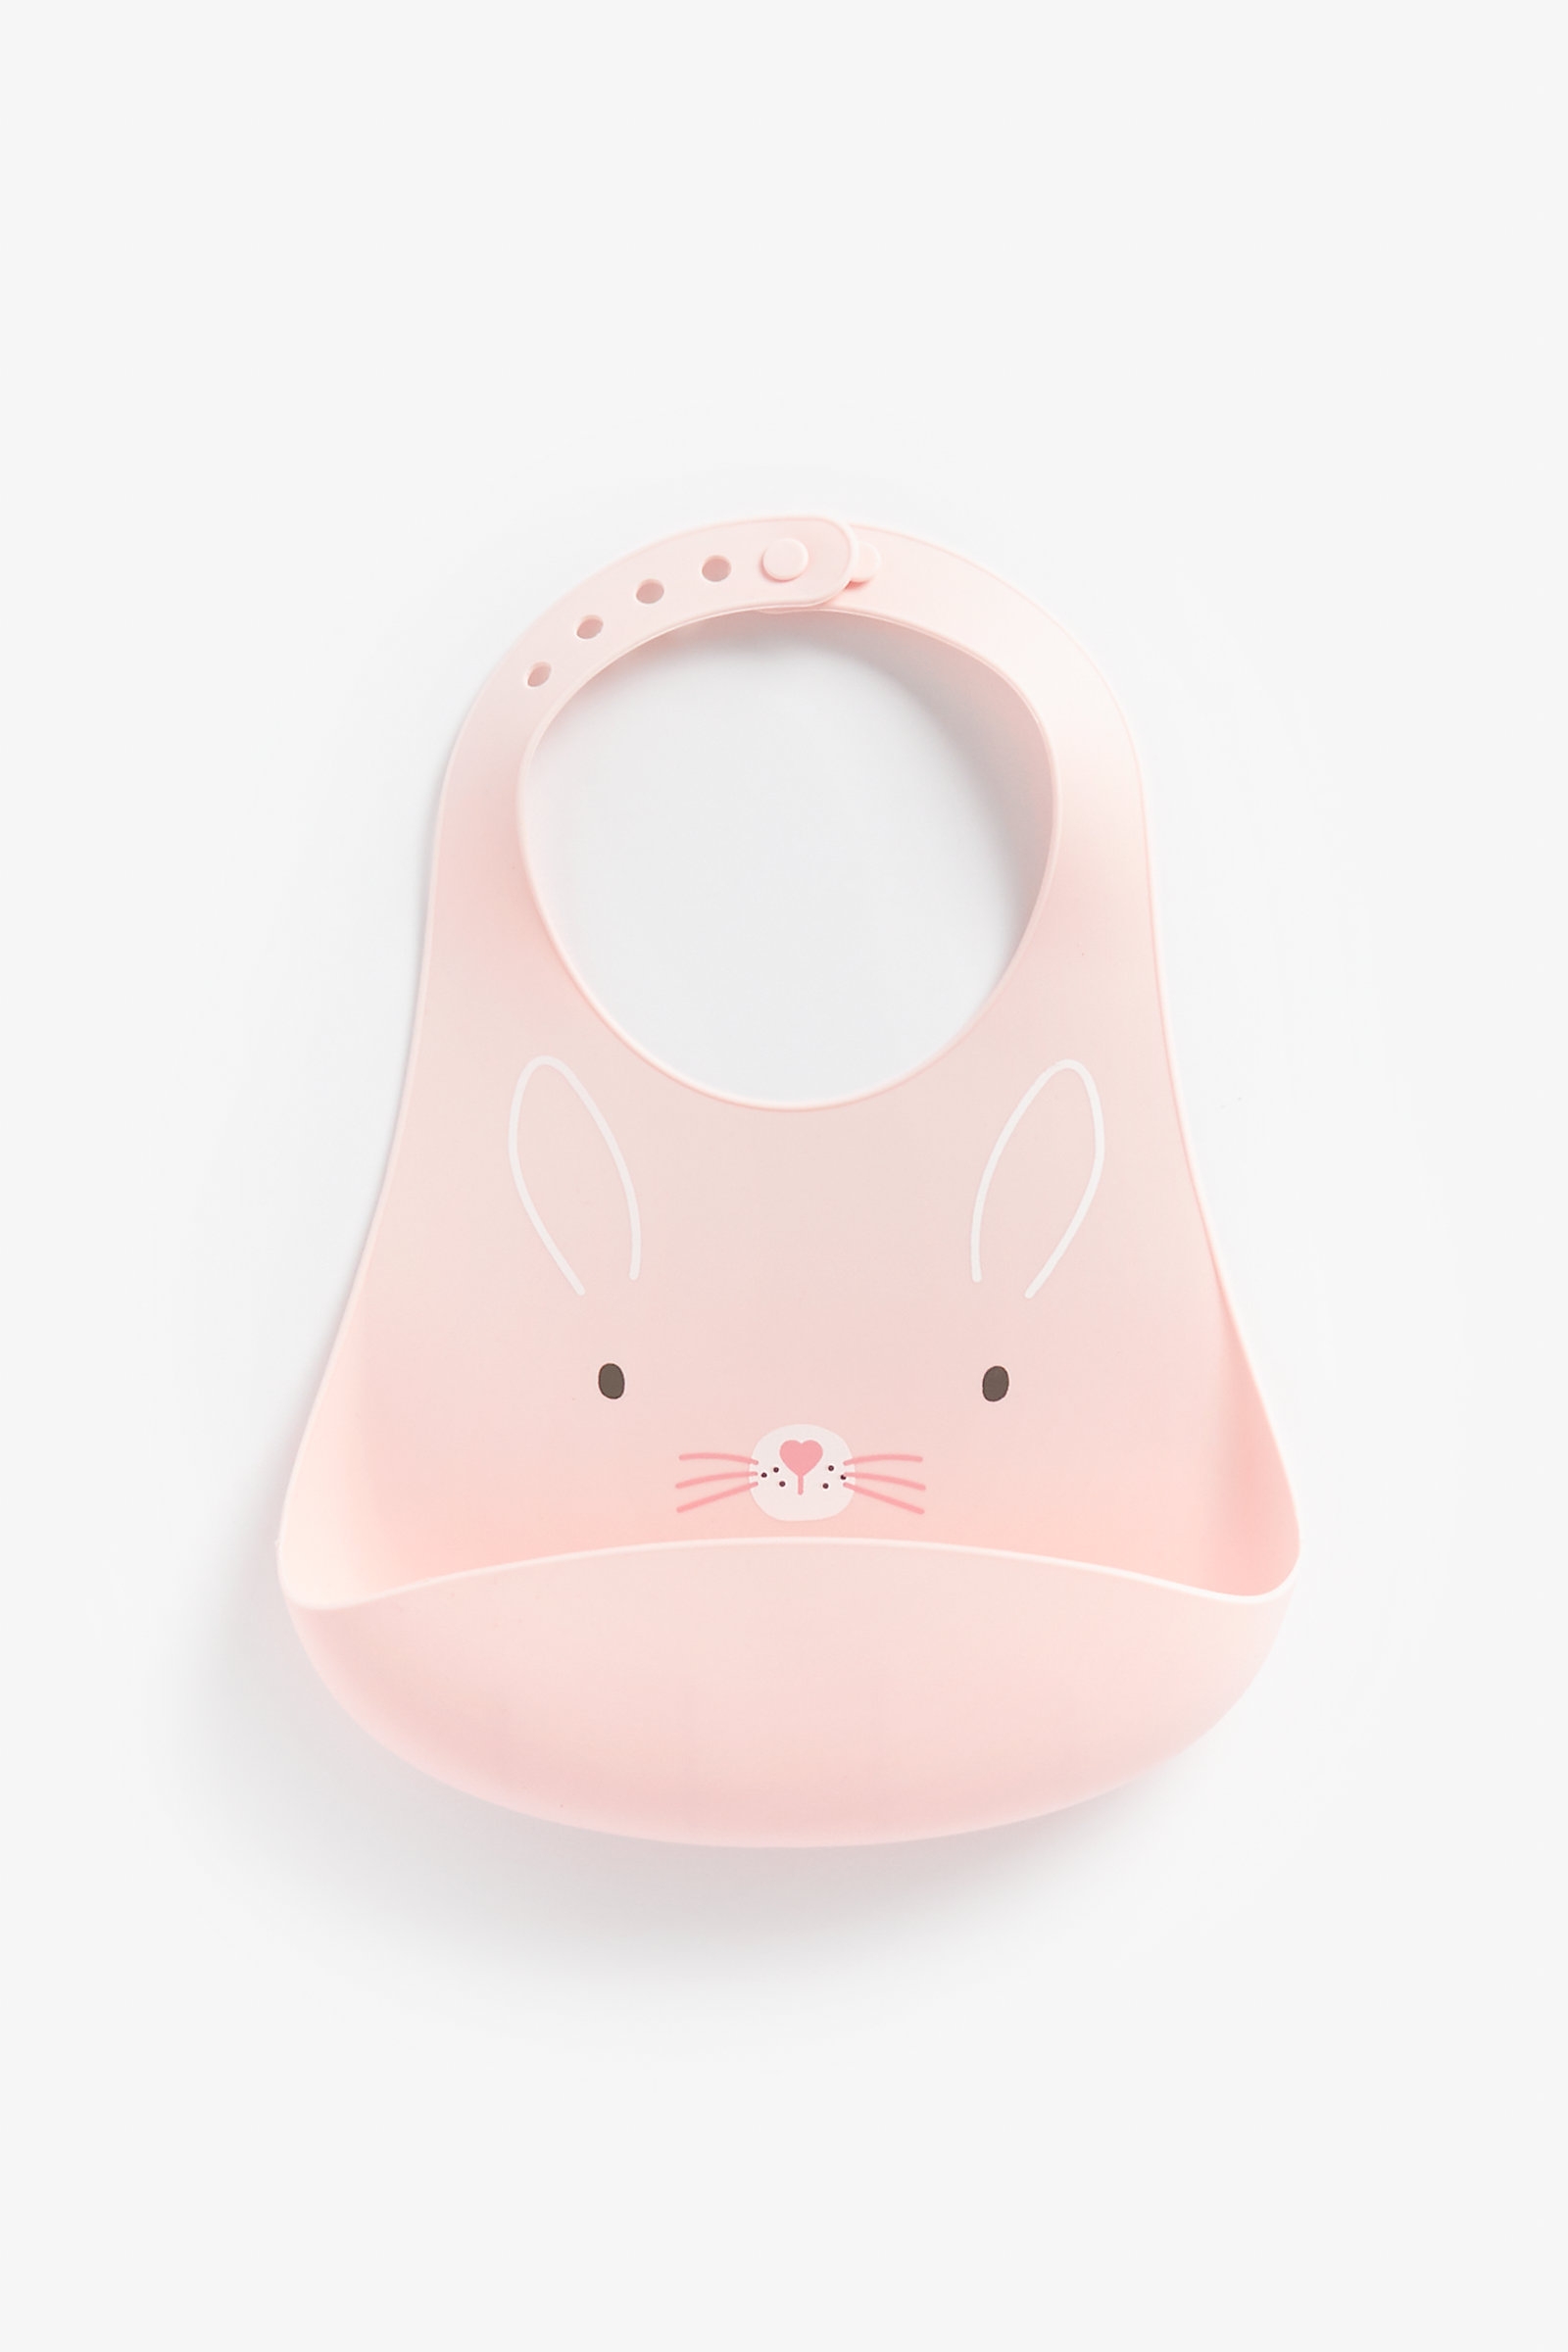 Mothercare Cat and Bunny Crumb-catcher Pink Pack of 2